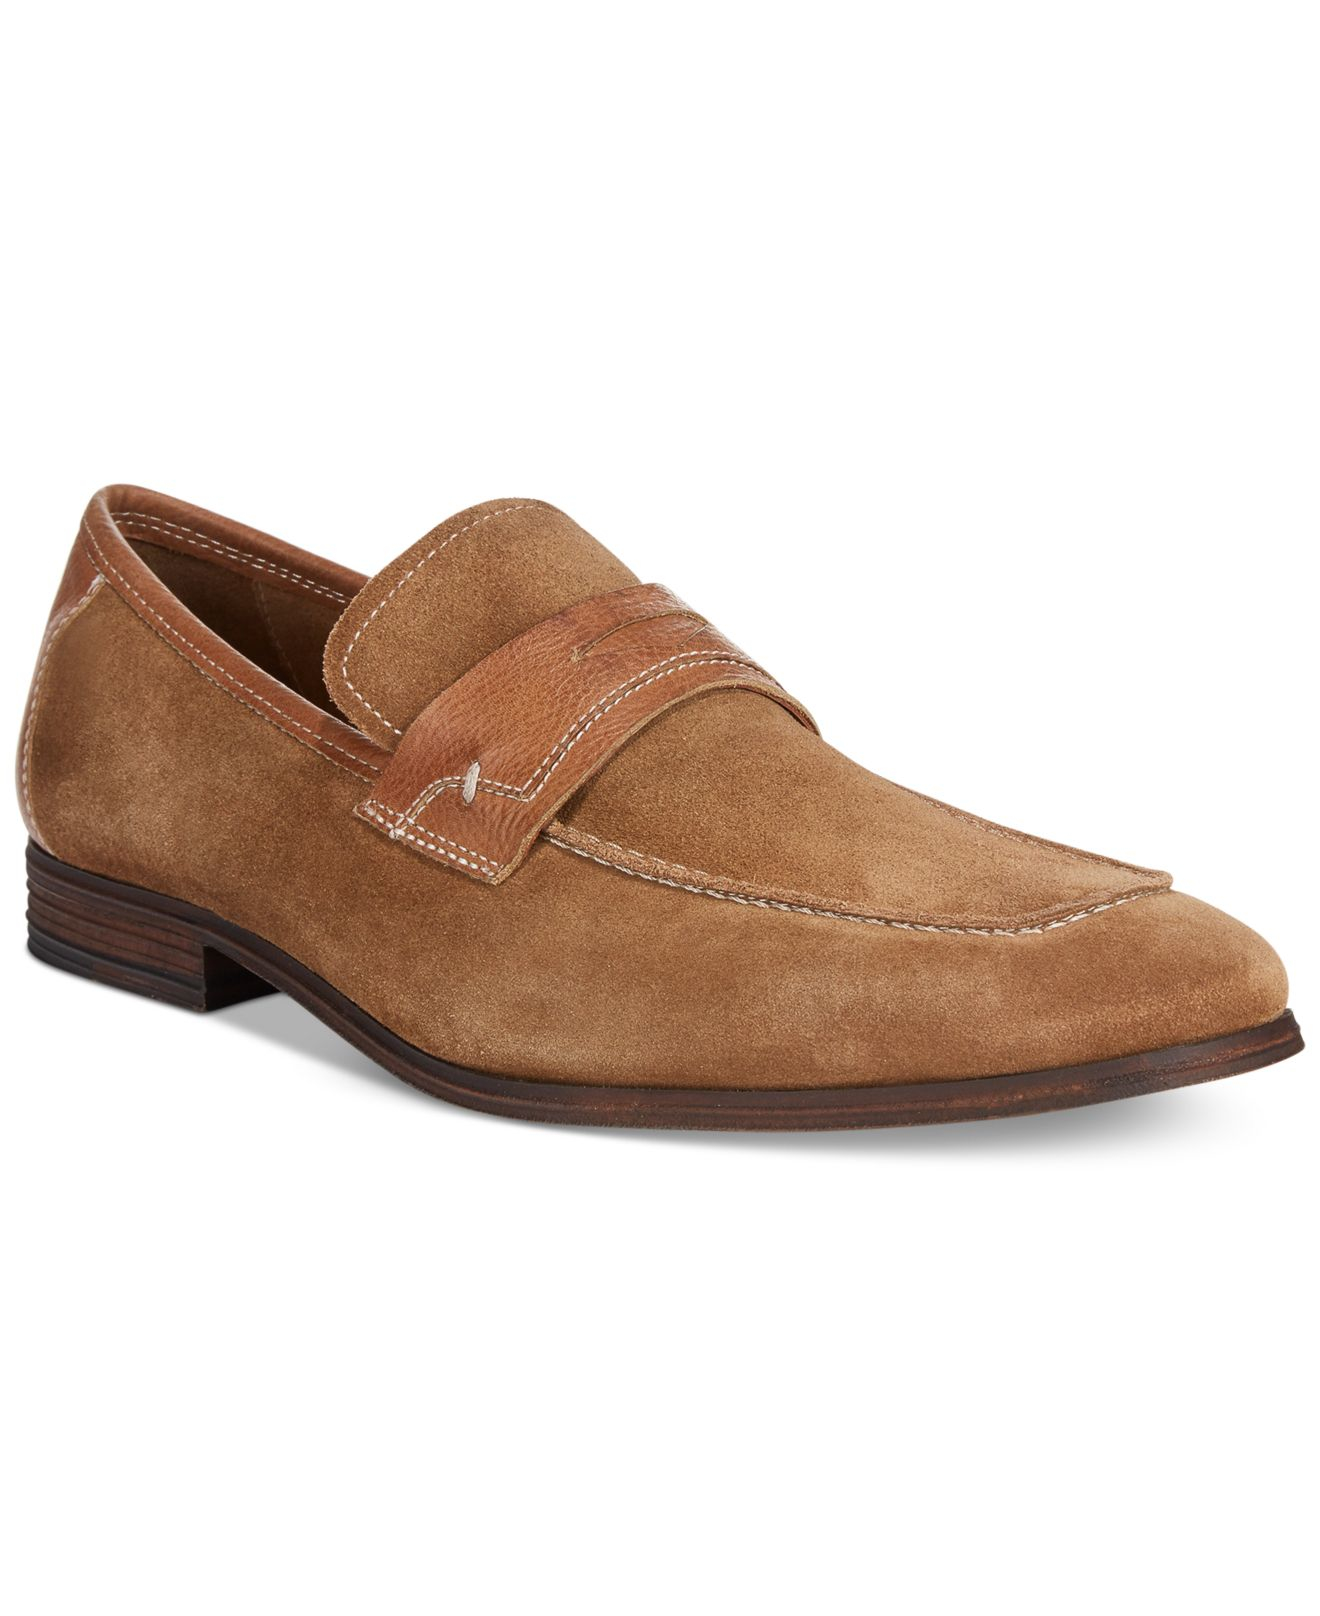 Lyst - Kenneth Cole Push Forward Loafers in Brown for Men